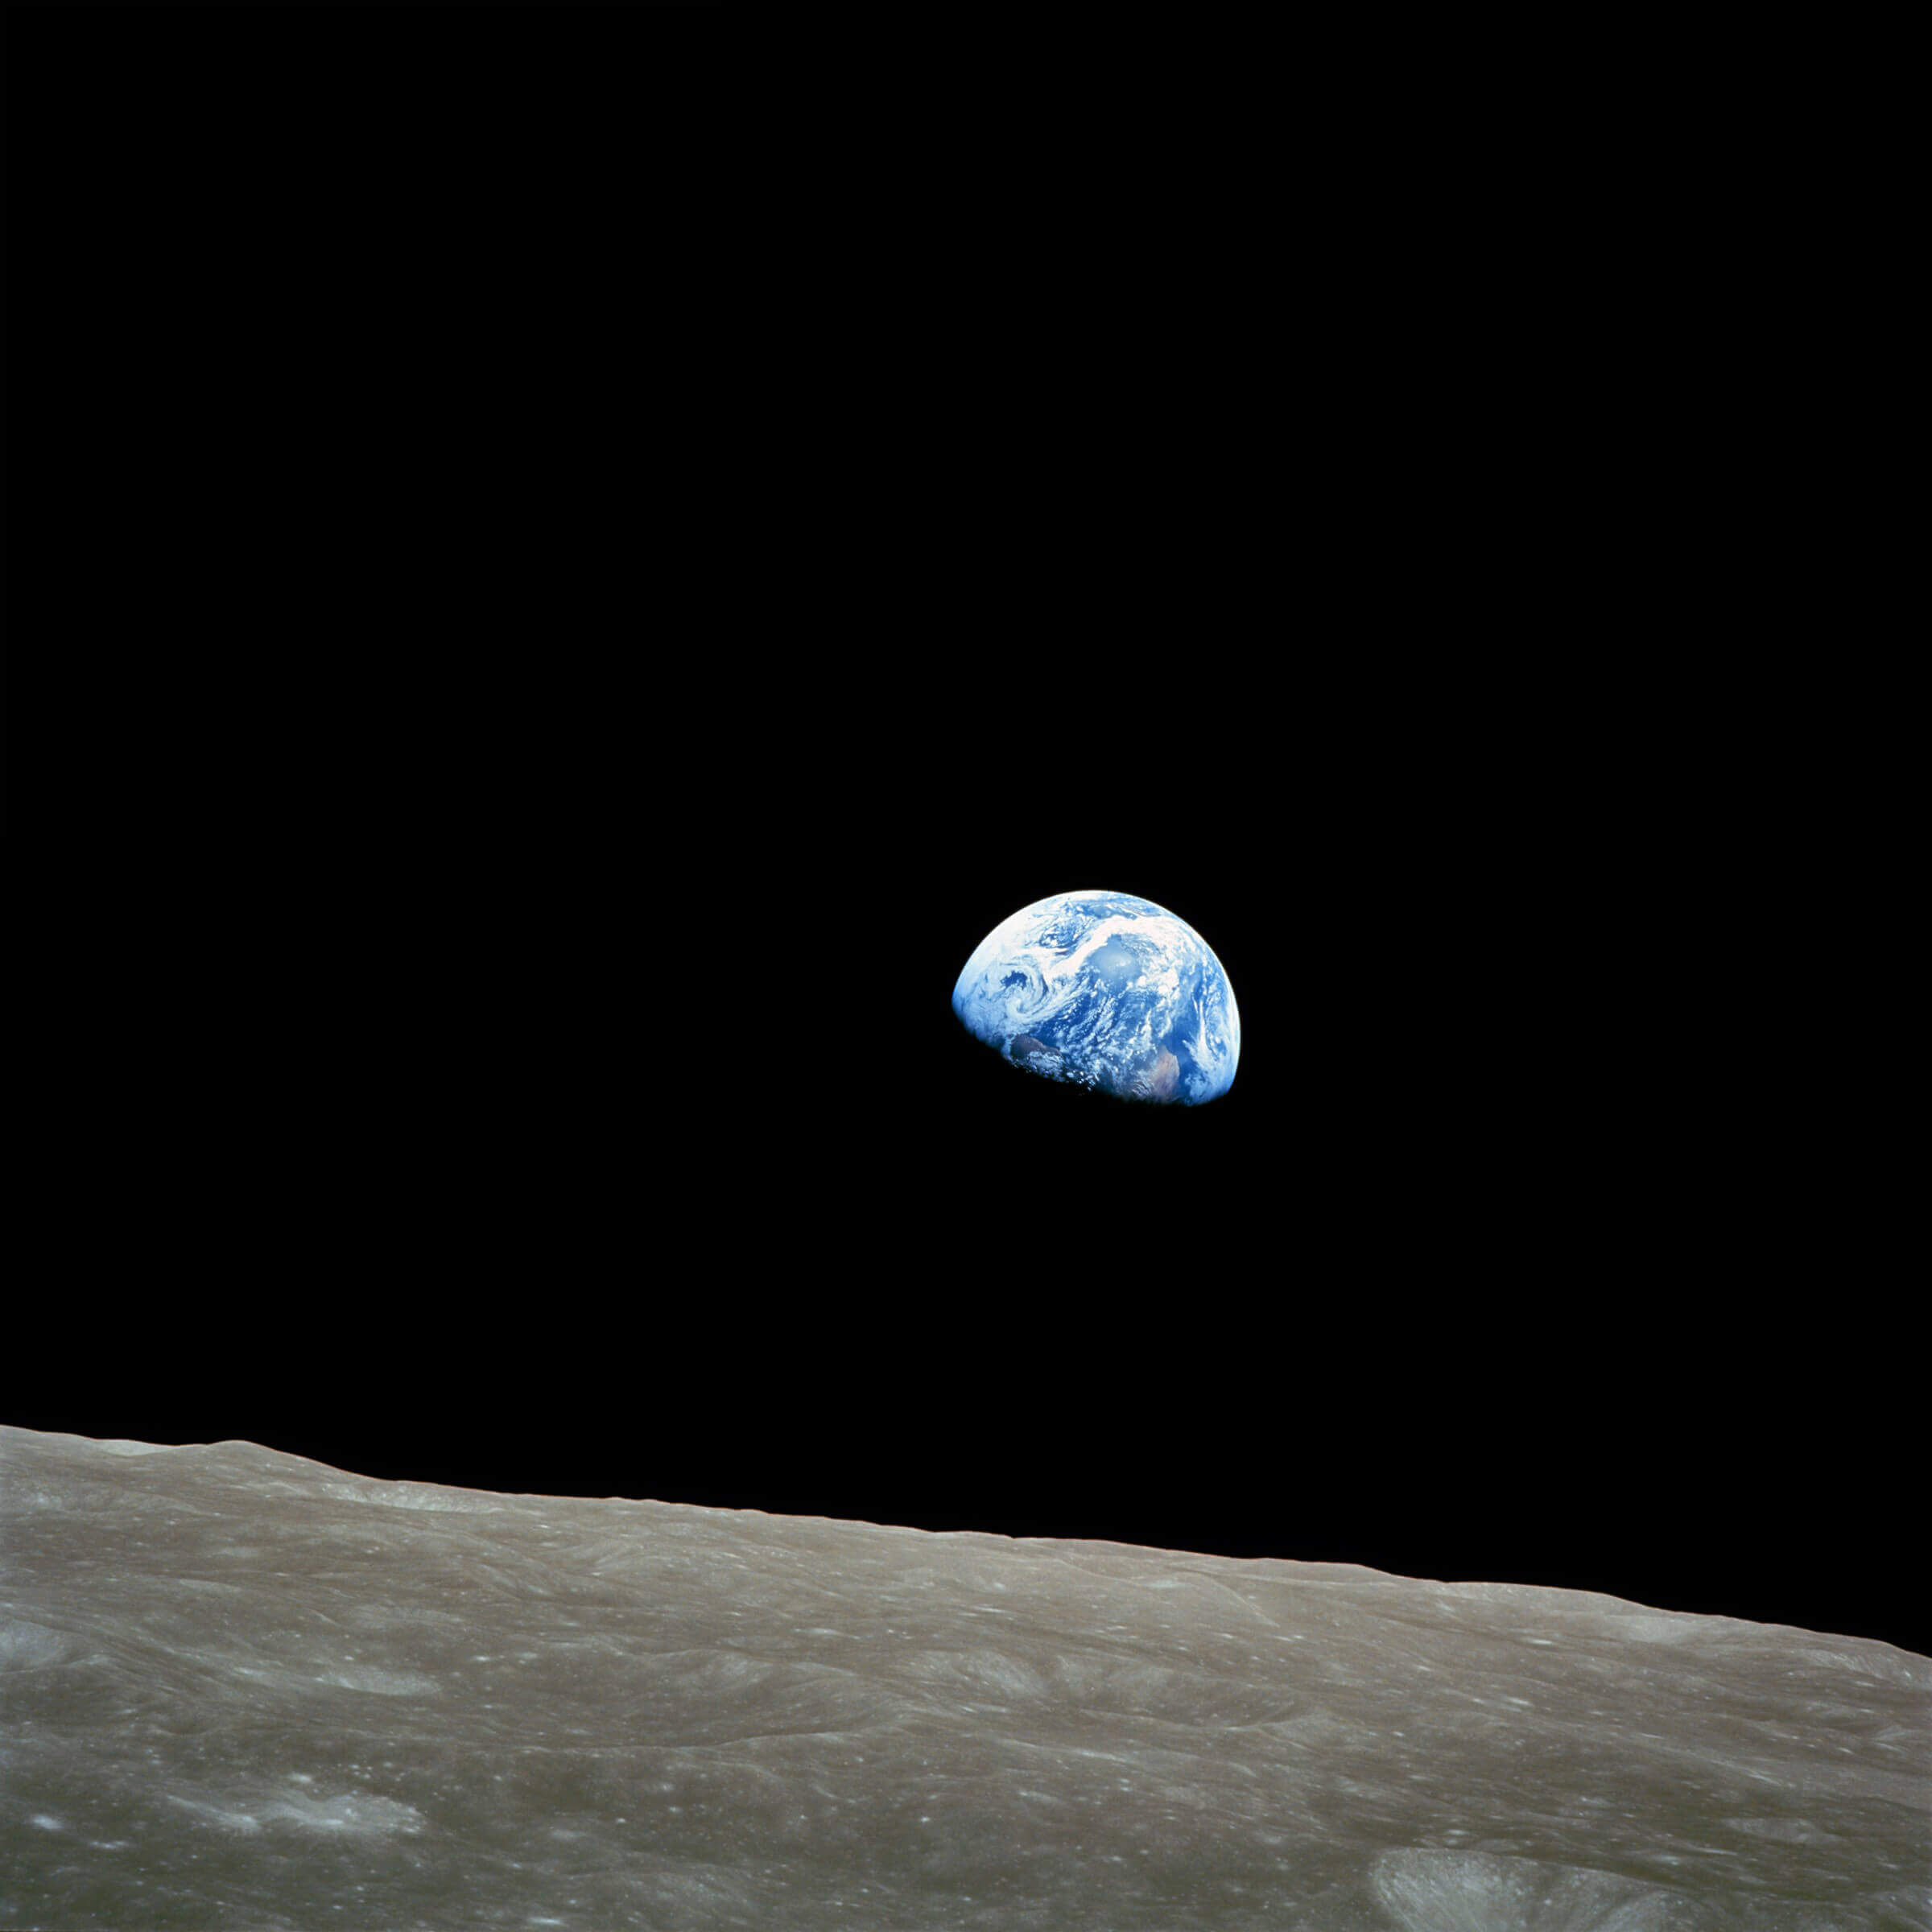 The Apollo 8 "Earthrise" photo - the earth seen from a distance from the surface of the moon.